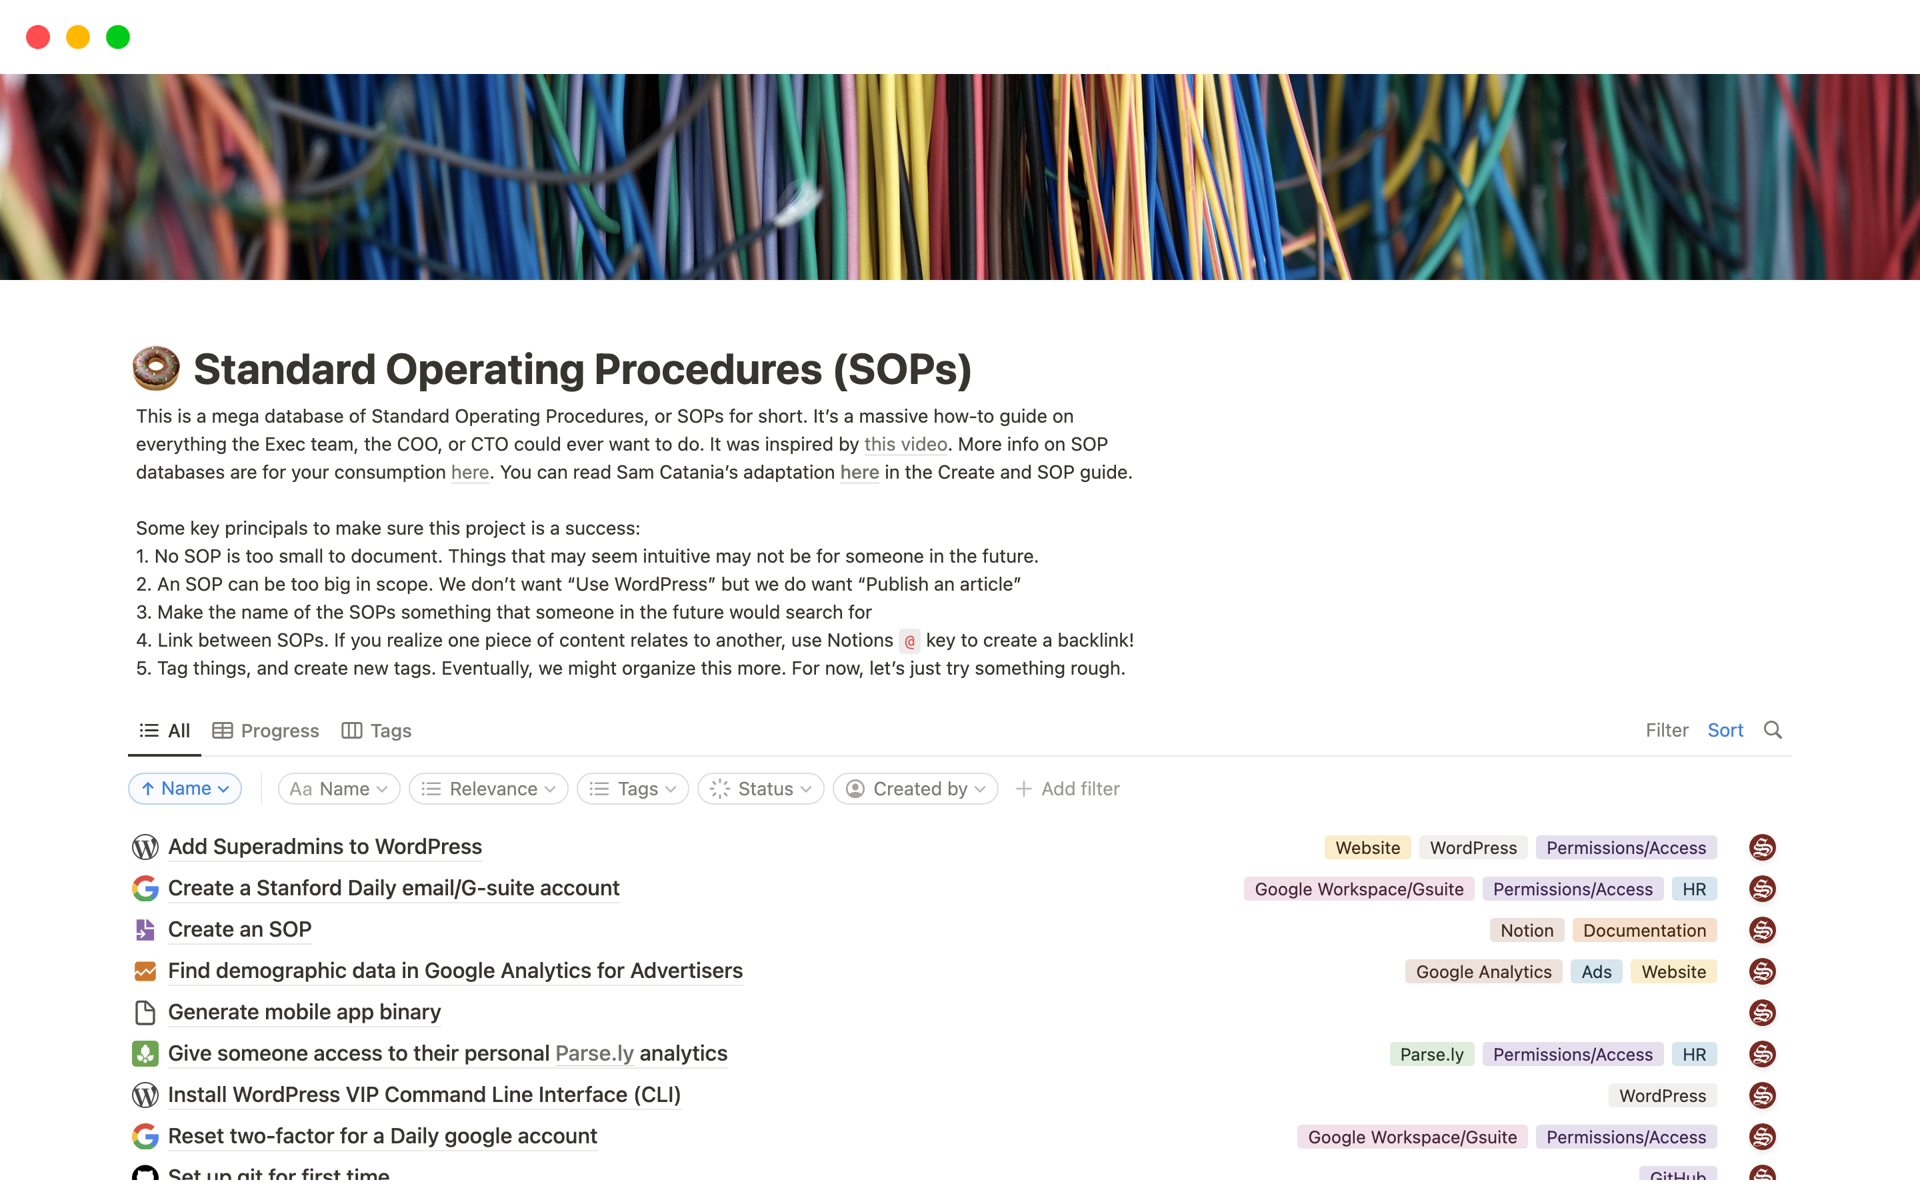 Document your team's processes with this Standard Operating Procedures (SOPs) template.